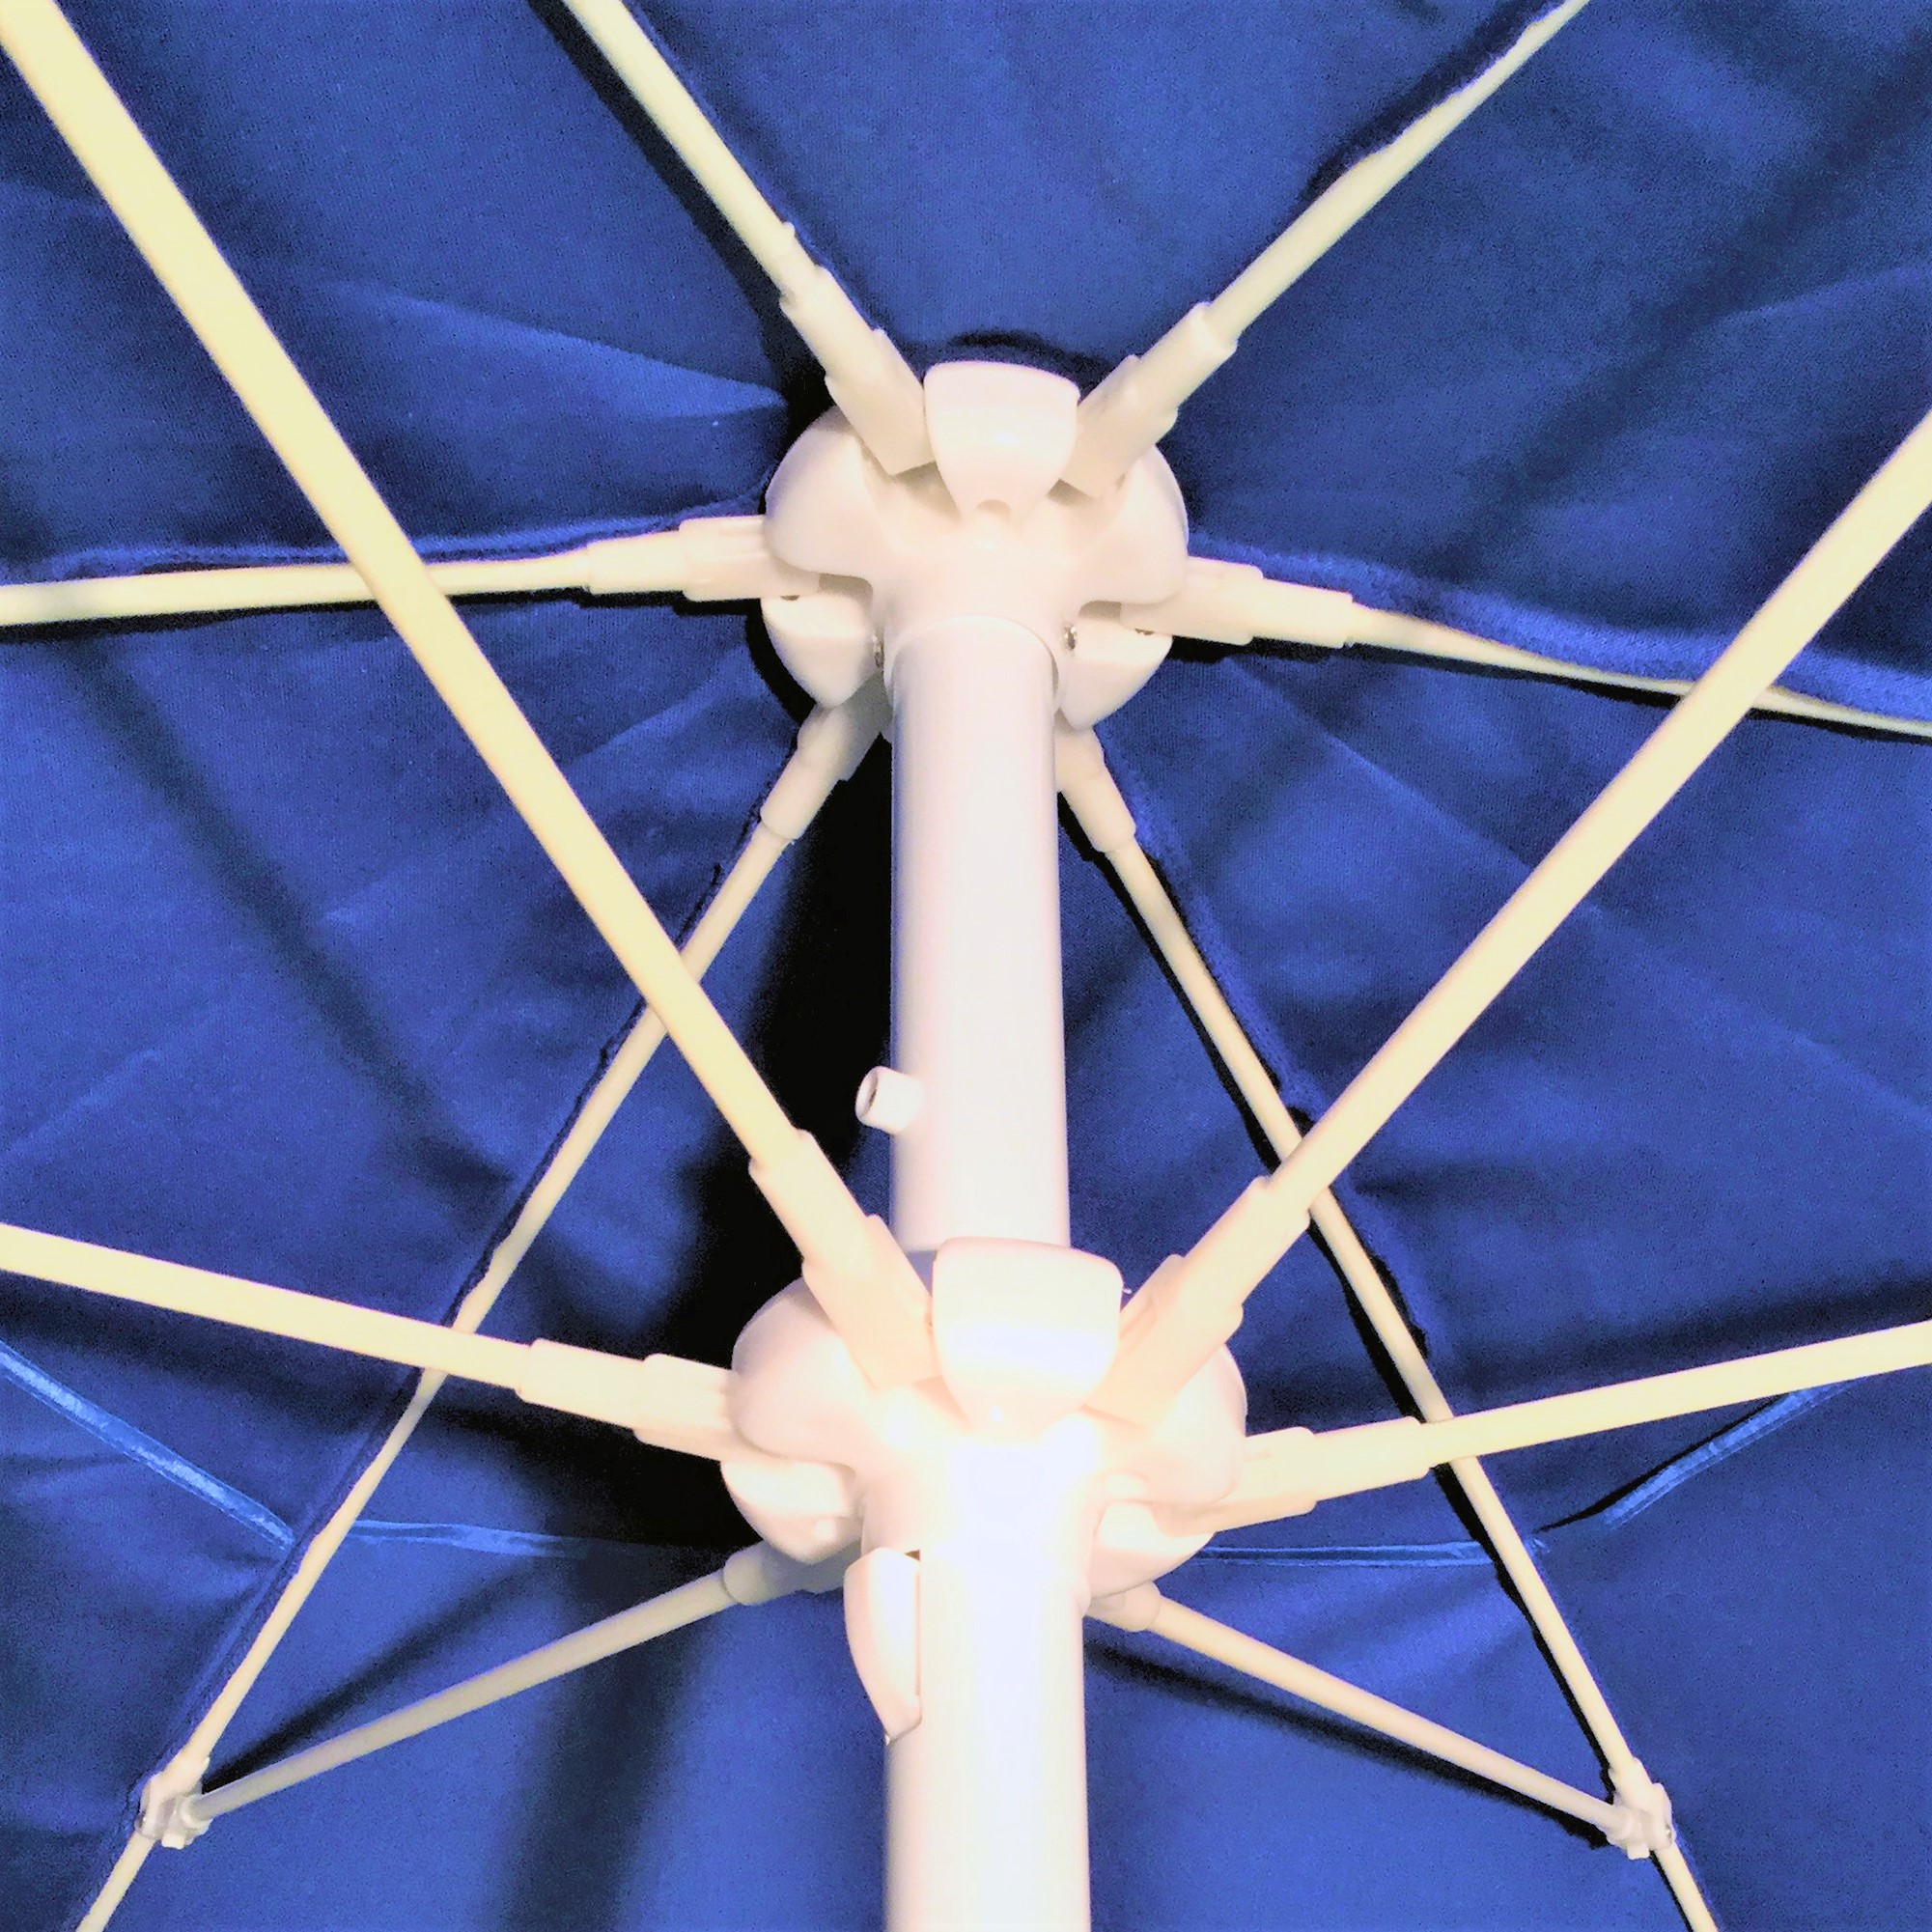 dig-git Beach Umbrella wind resistant, Royal blue vented with shovel sand anchor - image 4 of 6